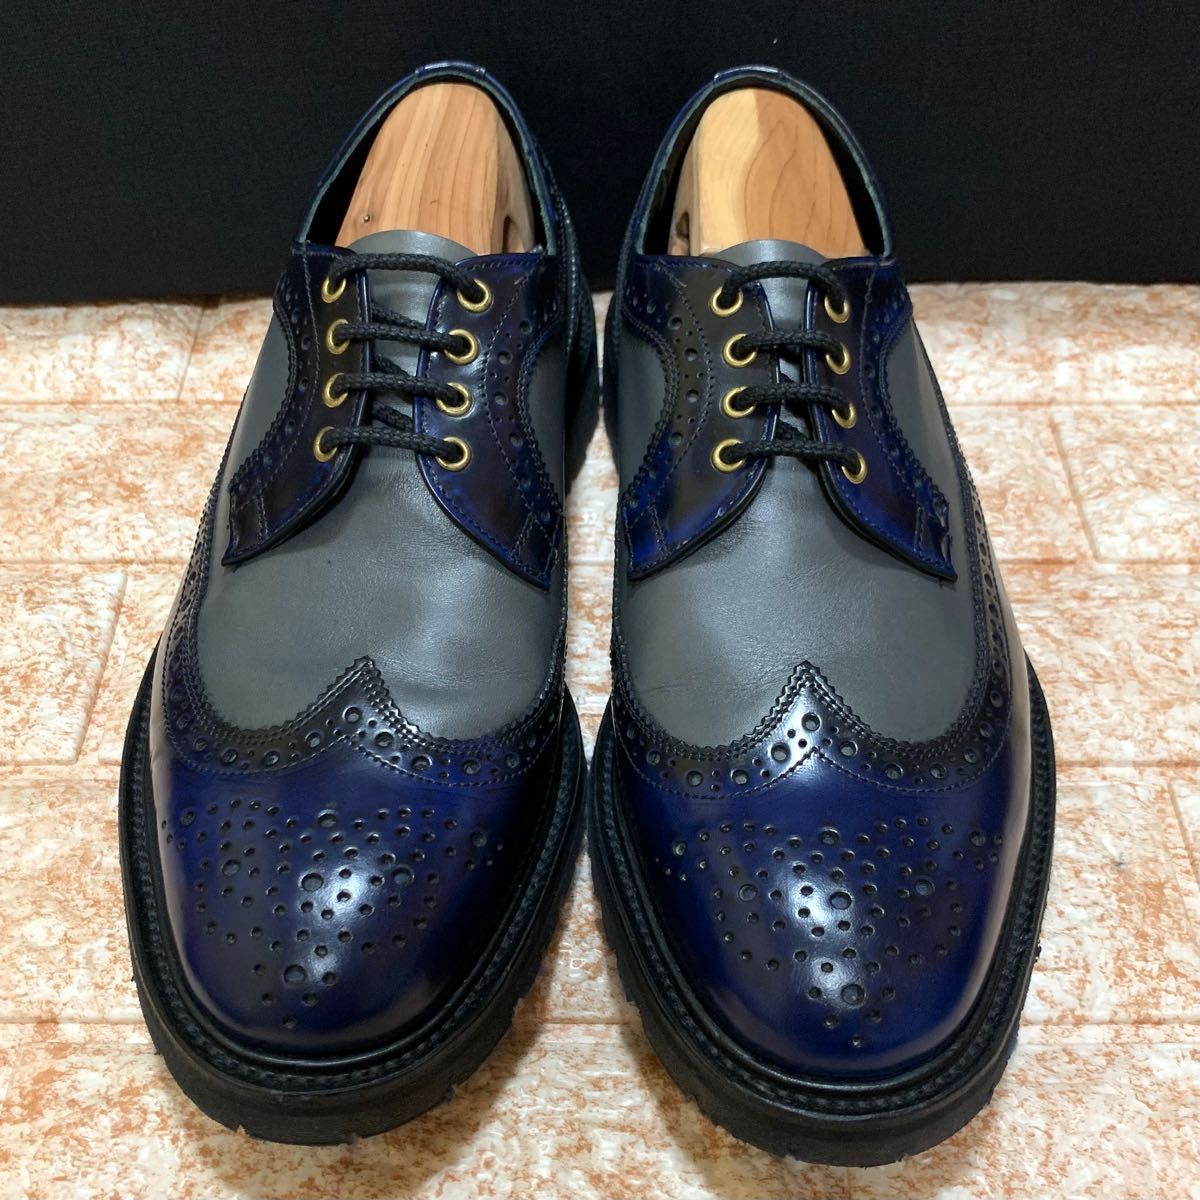 Lawrence shoes by Tricker's×GLAMB｜PayPayフリマ